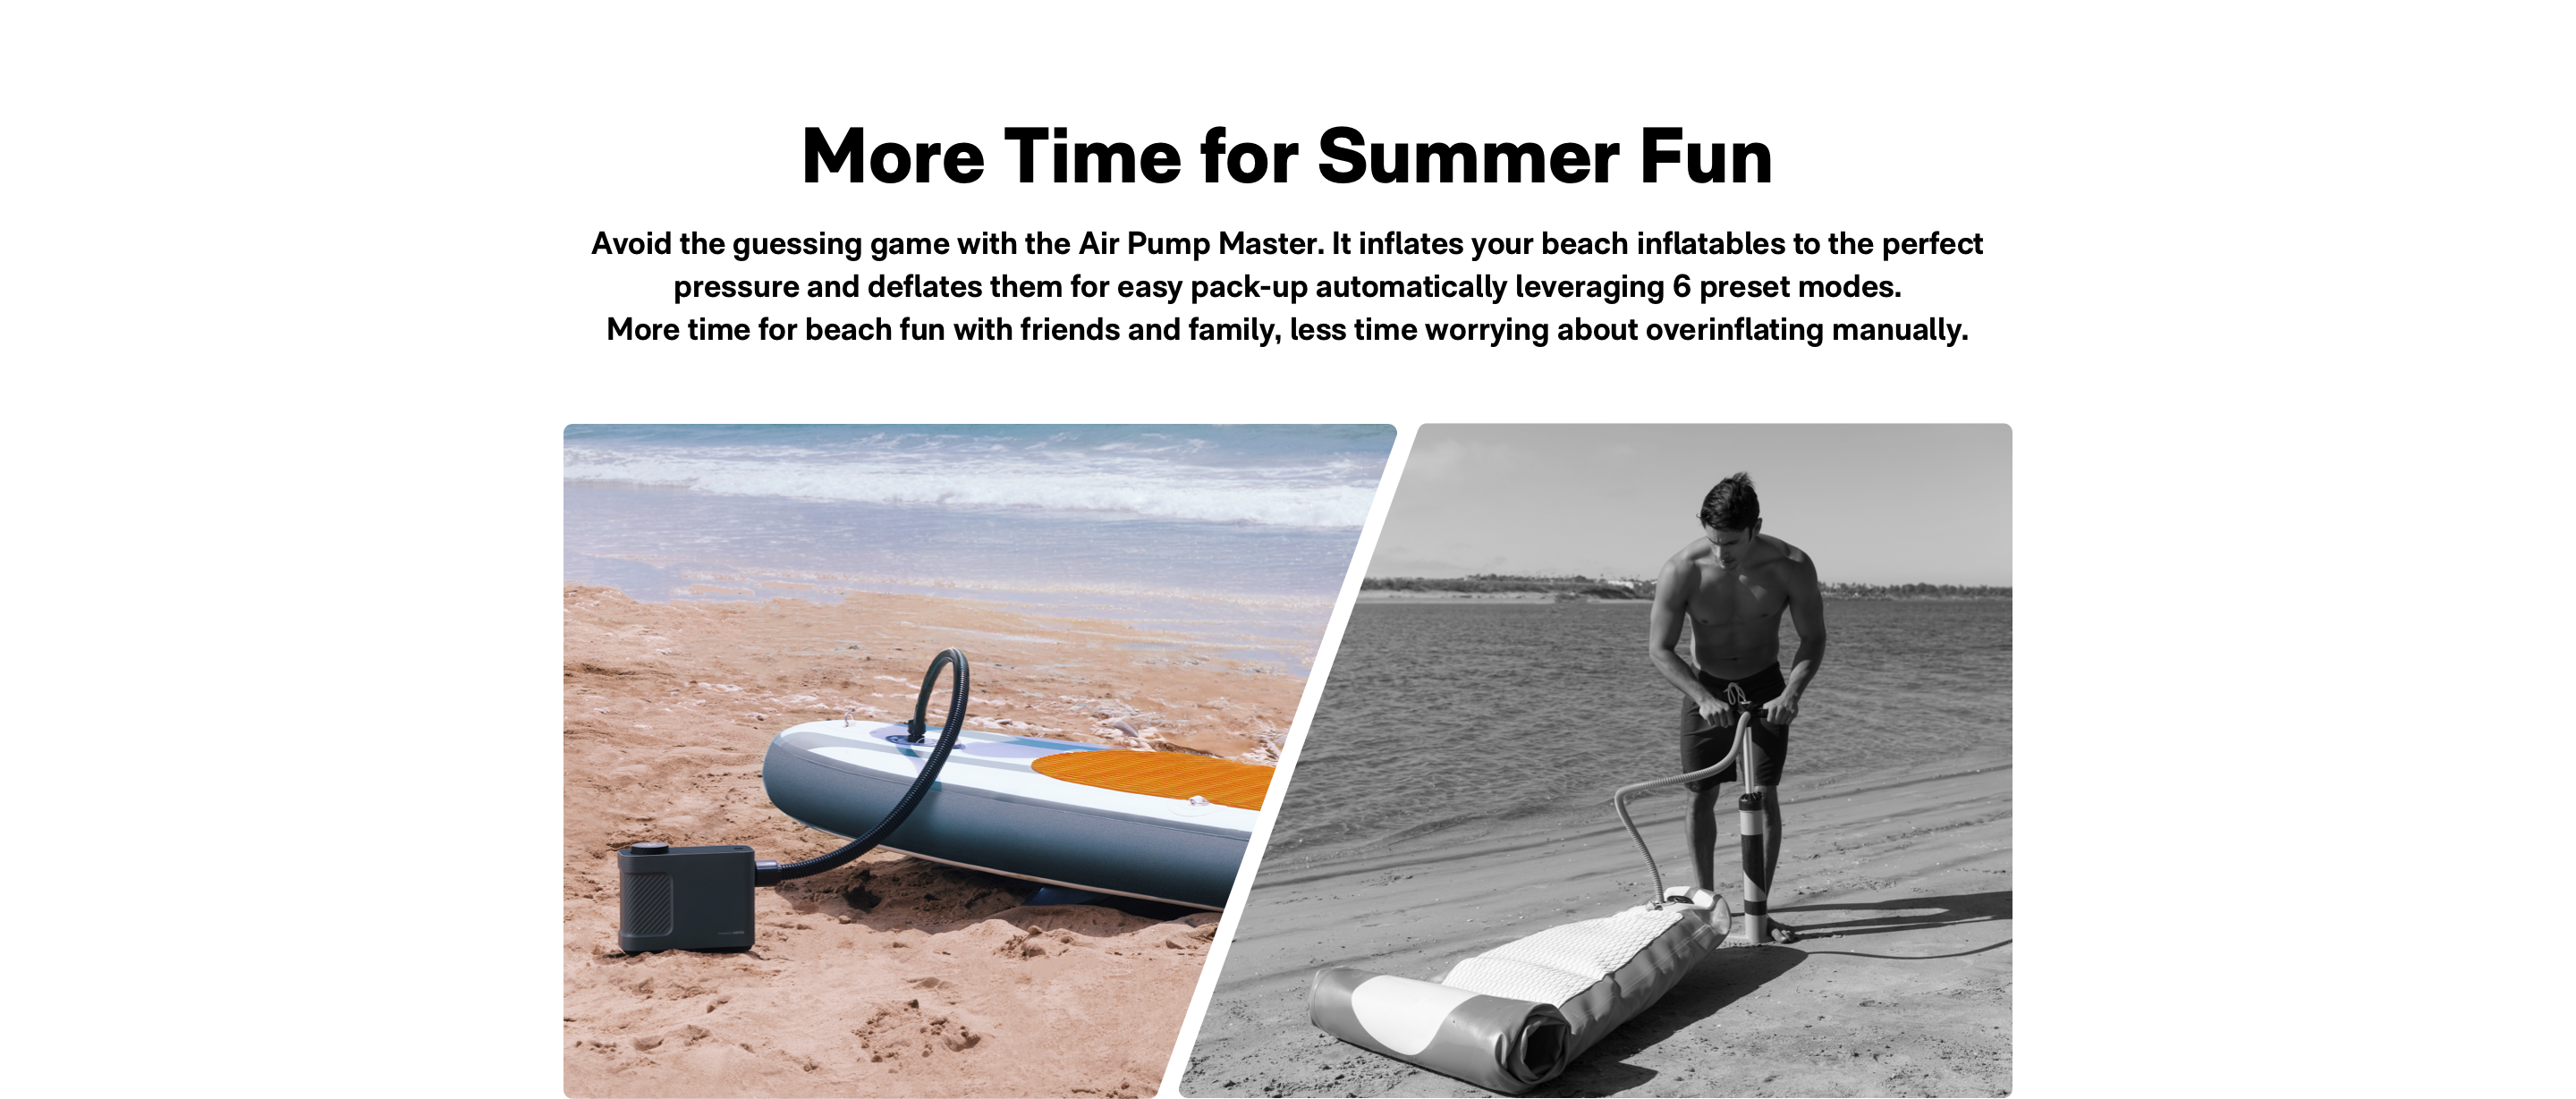 Air pump master is for Summer Fun. lt inflates your beach inflatables to the perfect pressure and deflates them for easy pack-up automatically leveraging 6 preset modes. More time for beach fun with friends and family, less time worrying about overinflating manually.